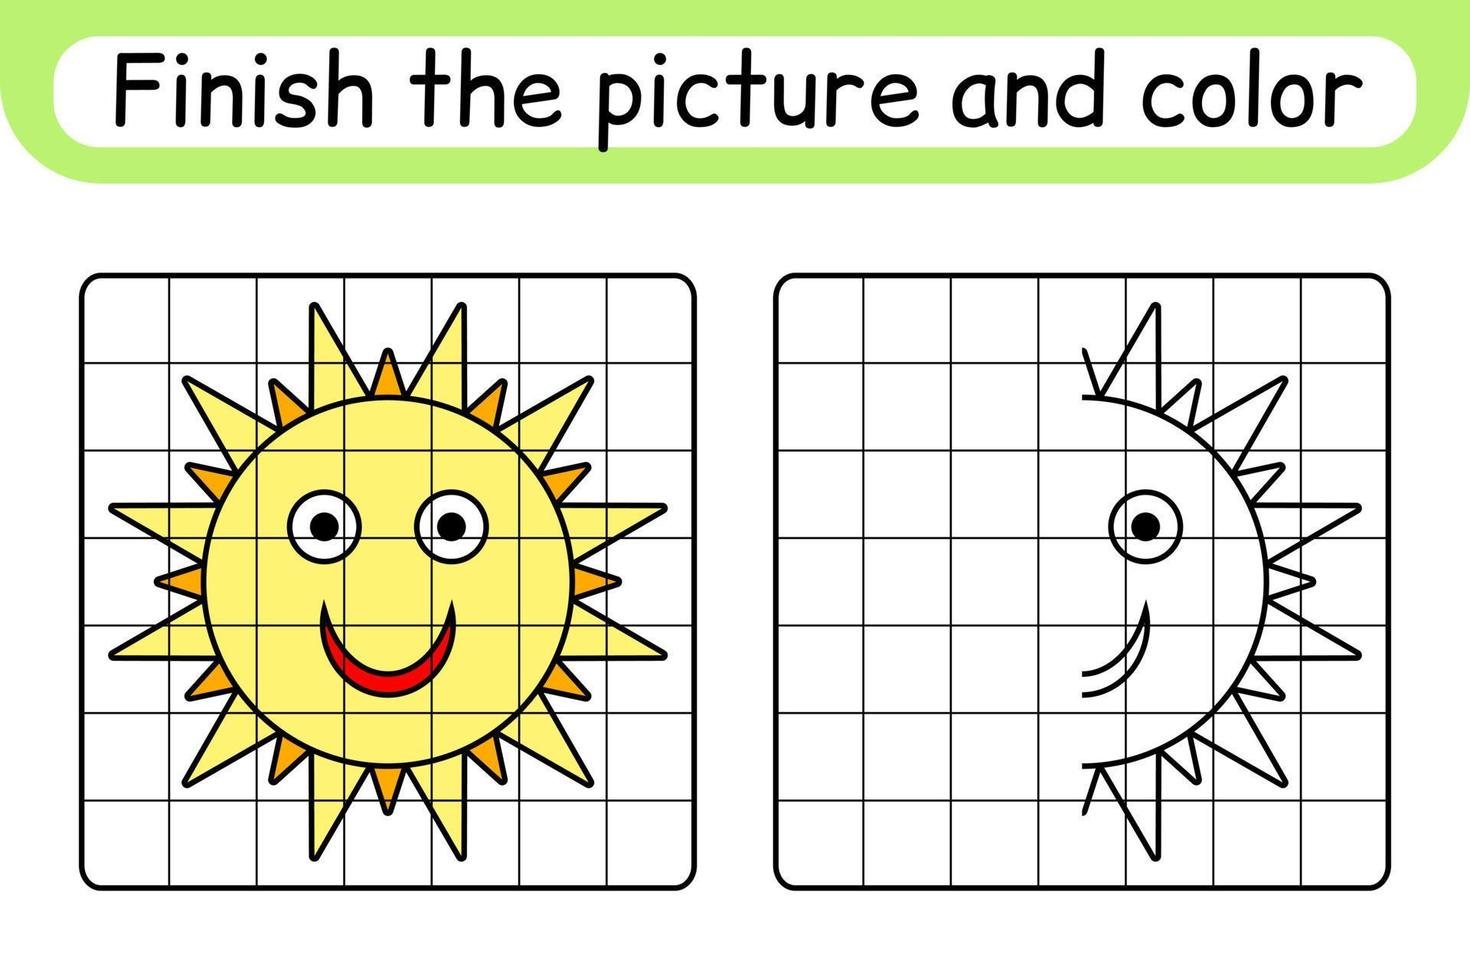 Complete the picture sun. Copy the picture and color. Finish the image. Coloring book. Educational drawing exercise game for children vector